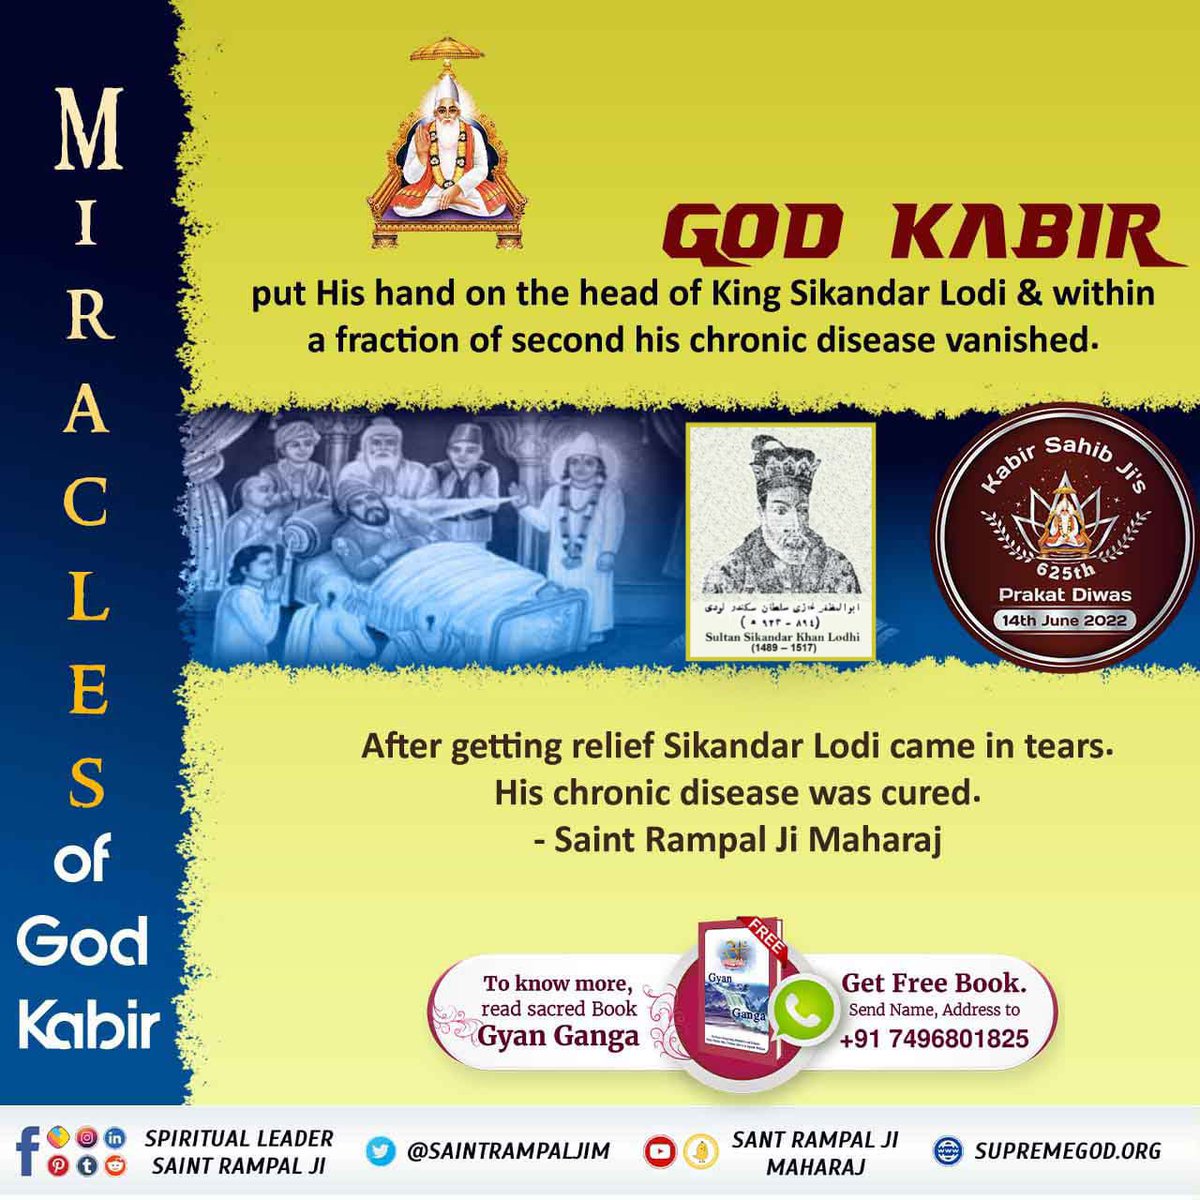 #Unbelievable_Miracles_Of_God

Purna Parmatma Kabir Sahib ji revived the honor and revival of the dead son of Neki's dead son Sev by adding the severed neck.